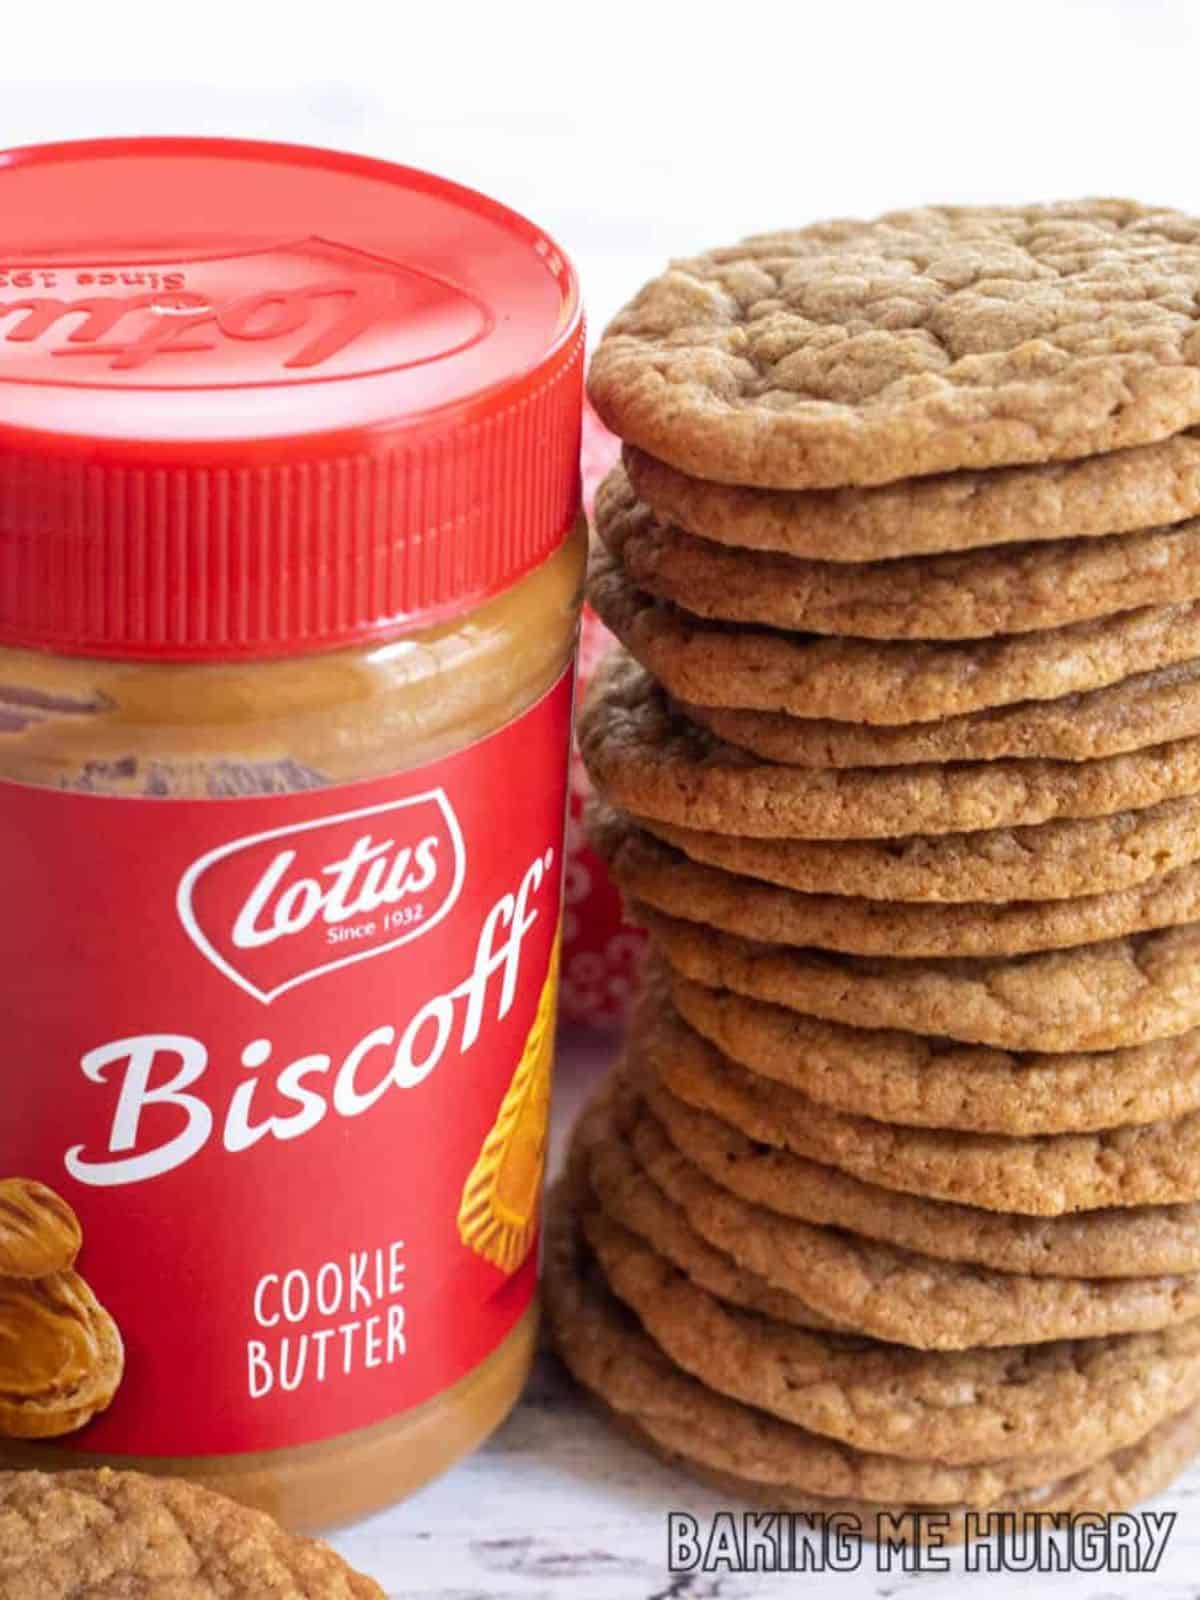 soft and decadent Biscoff butter cookies.